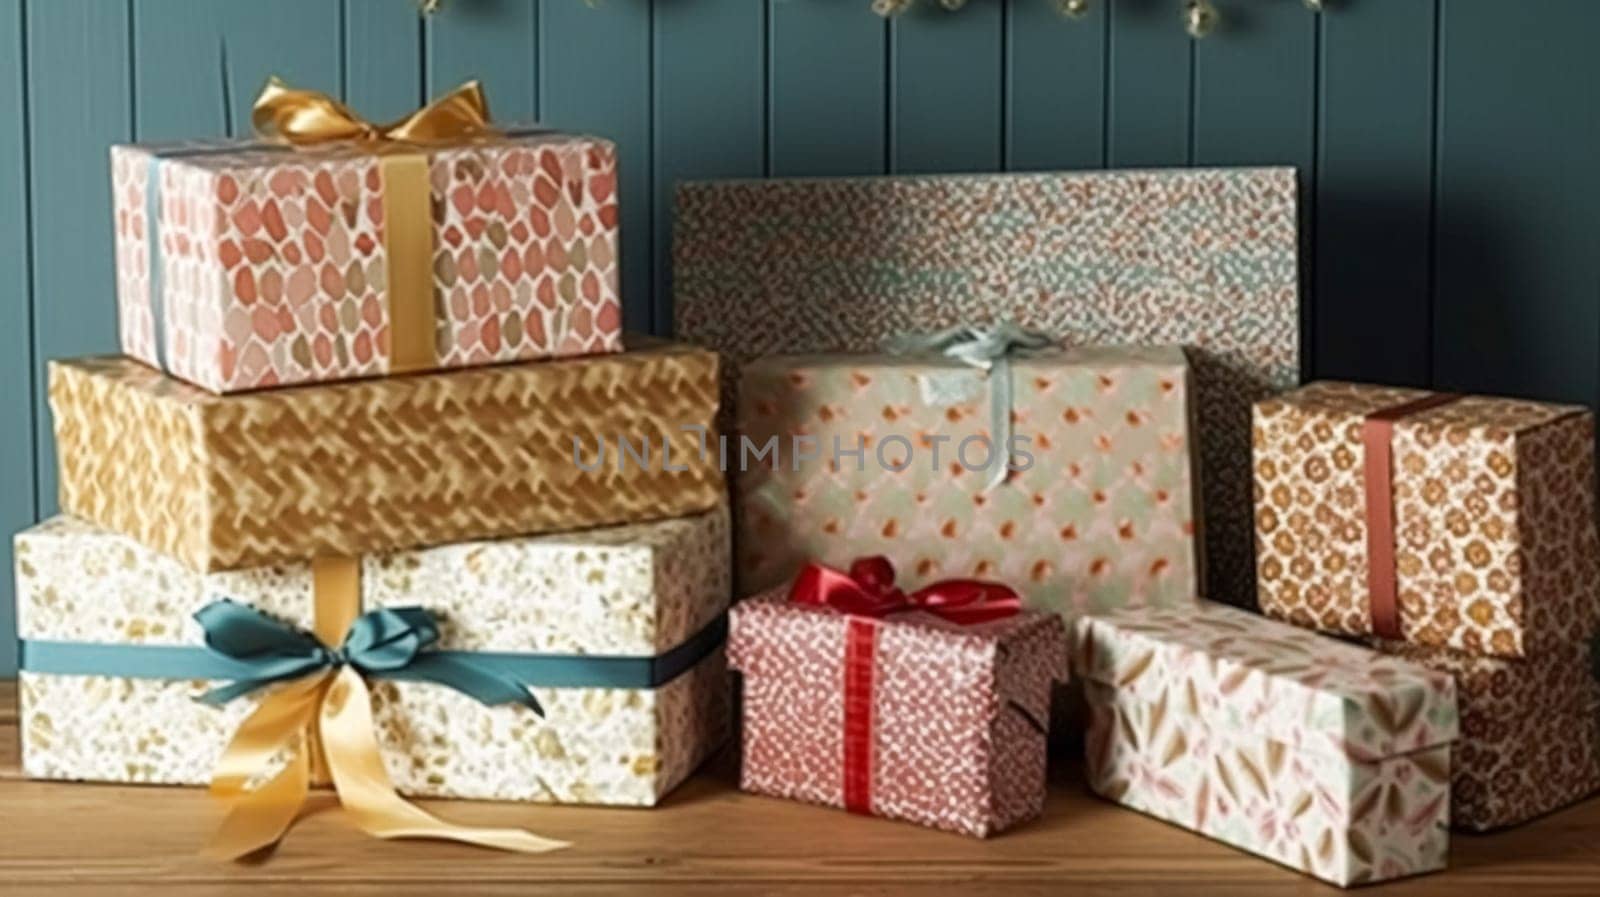 Holiday gifts and presents, country cottage style wrapped gift boxes for boxing day, Christmas, Valentines day and holidays shopping sale, beauty box delivery idea